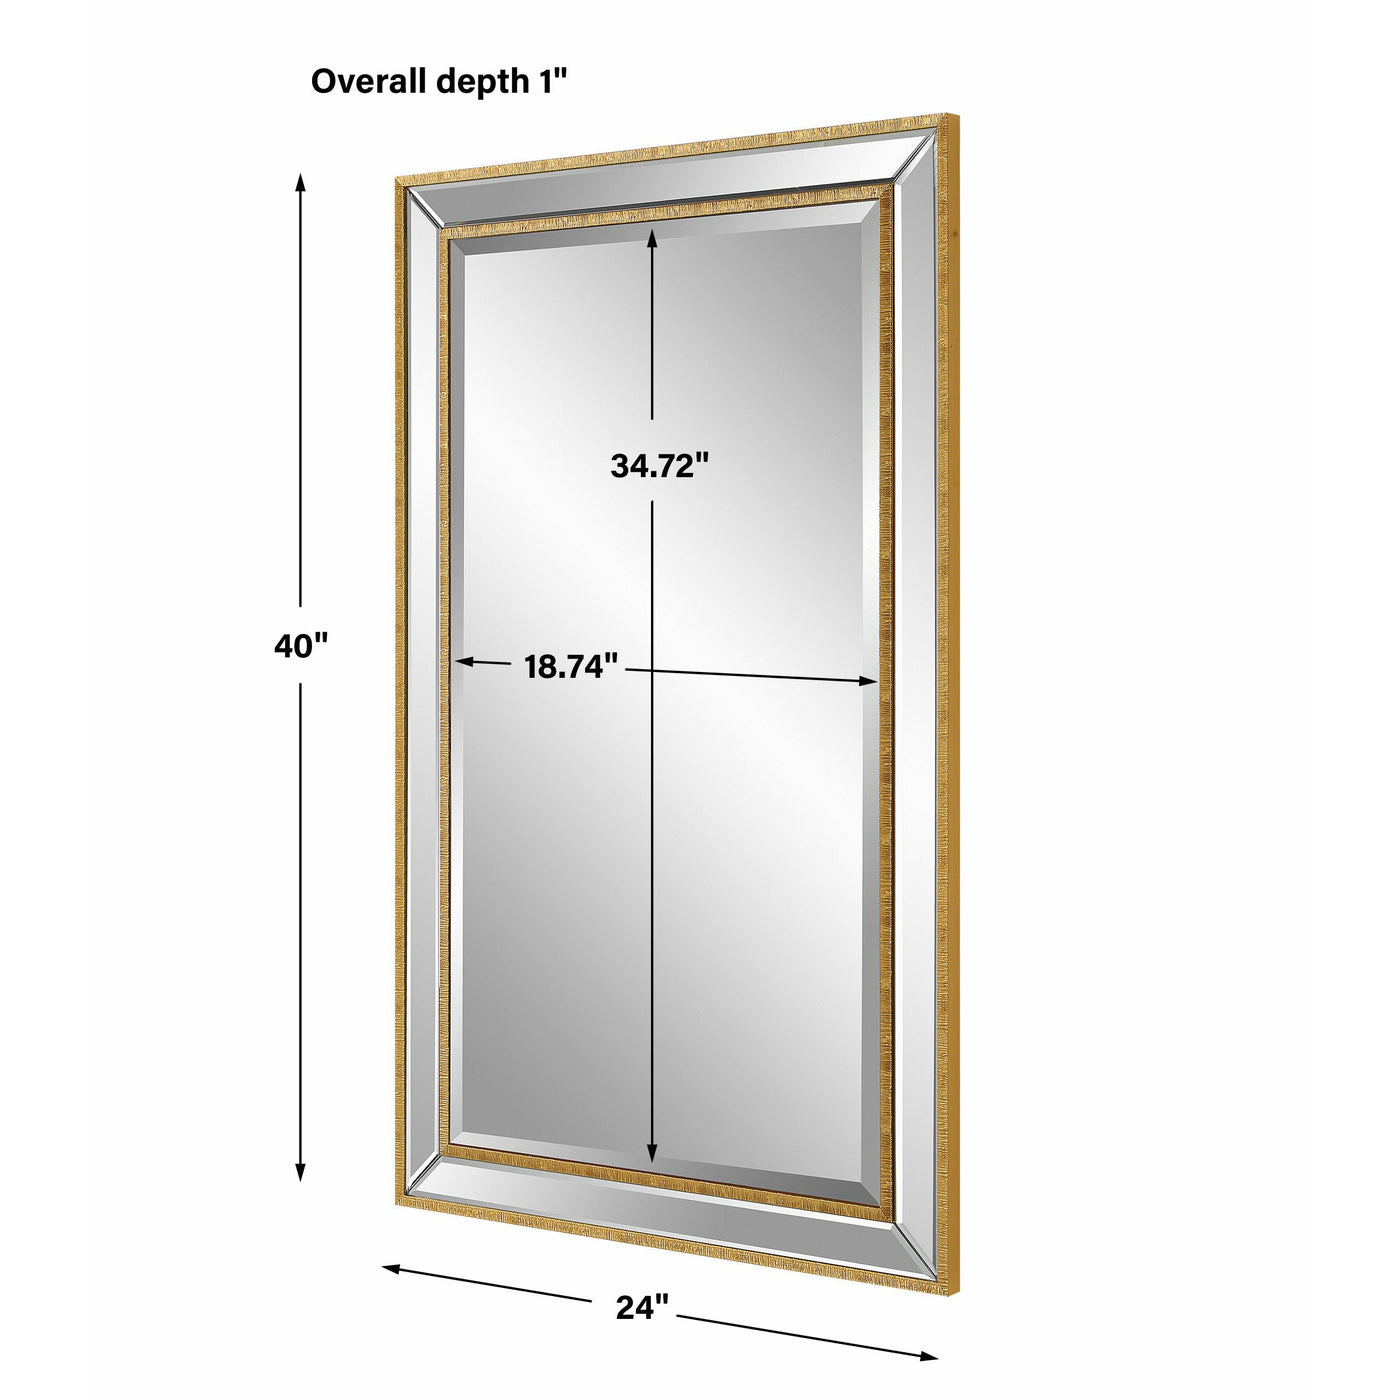 The Cape May - Rectangular Mirror with Beveled Mirrored Frame and Gold Trim